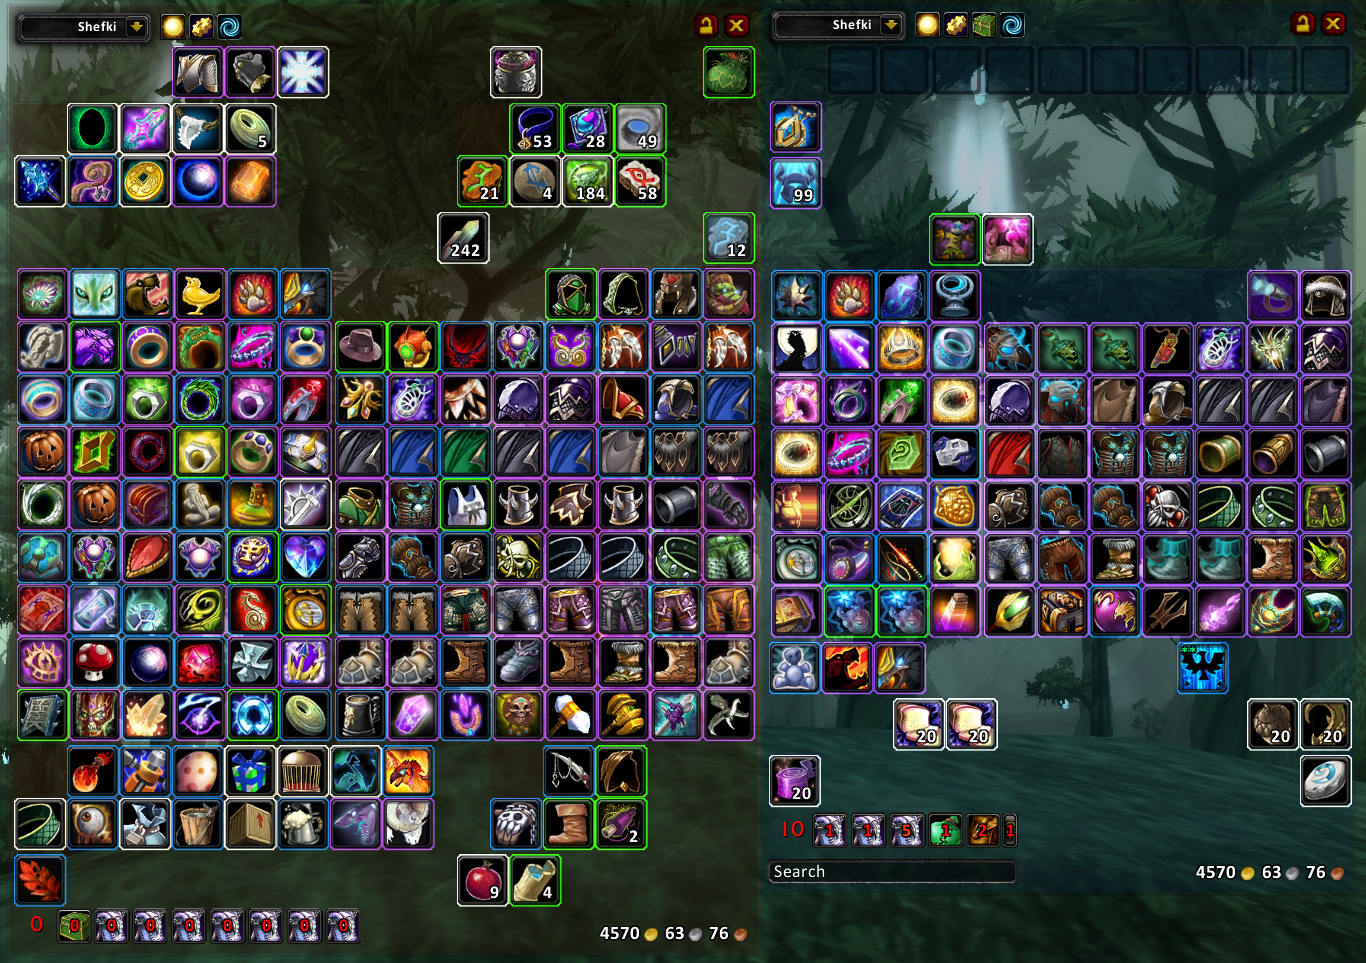 I want fluid Hornet TBag-Shefki : Bags, Bank, Inventory : World of Warcraft AddOns